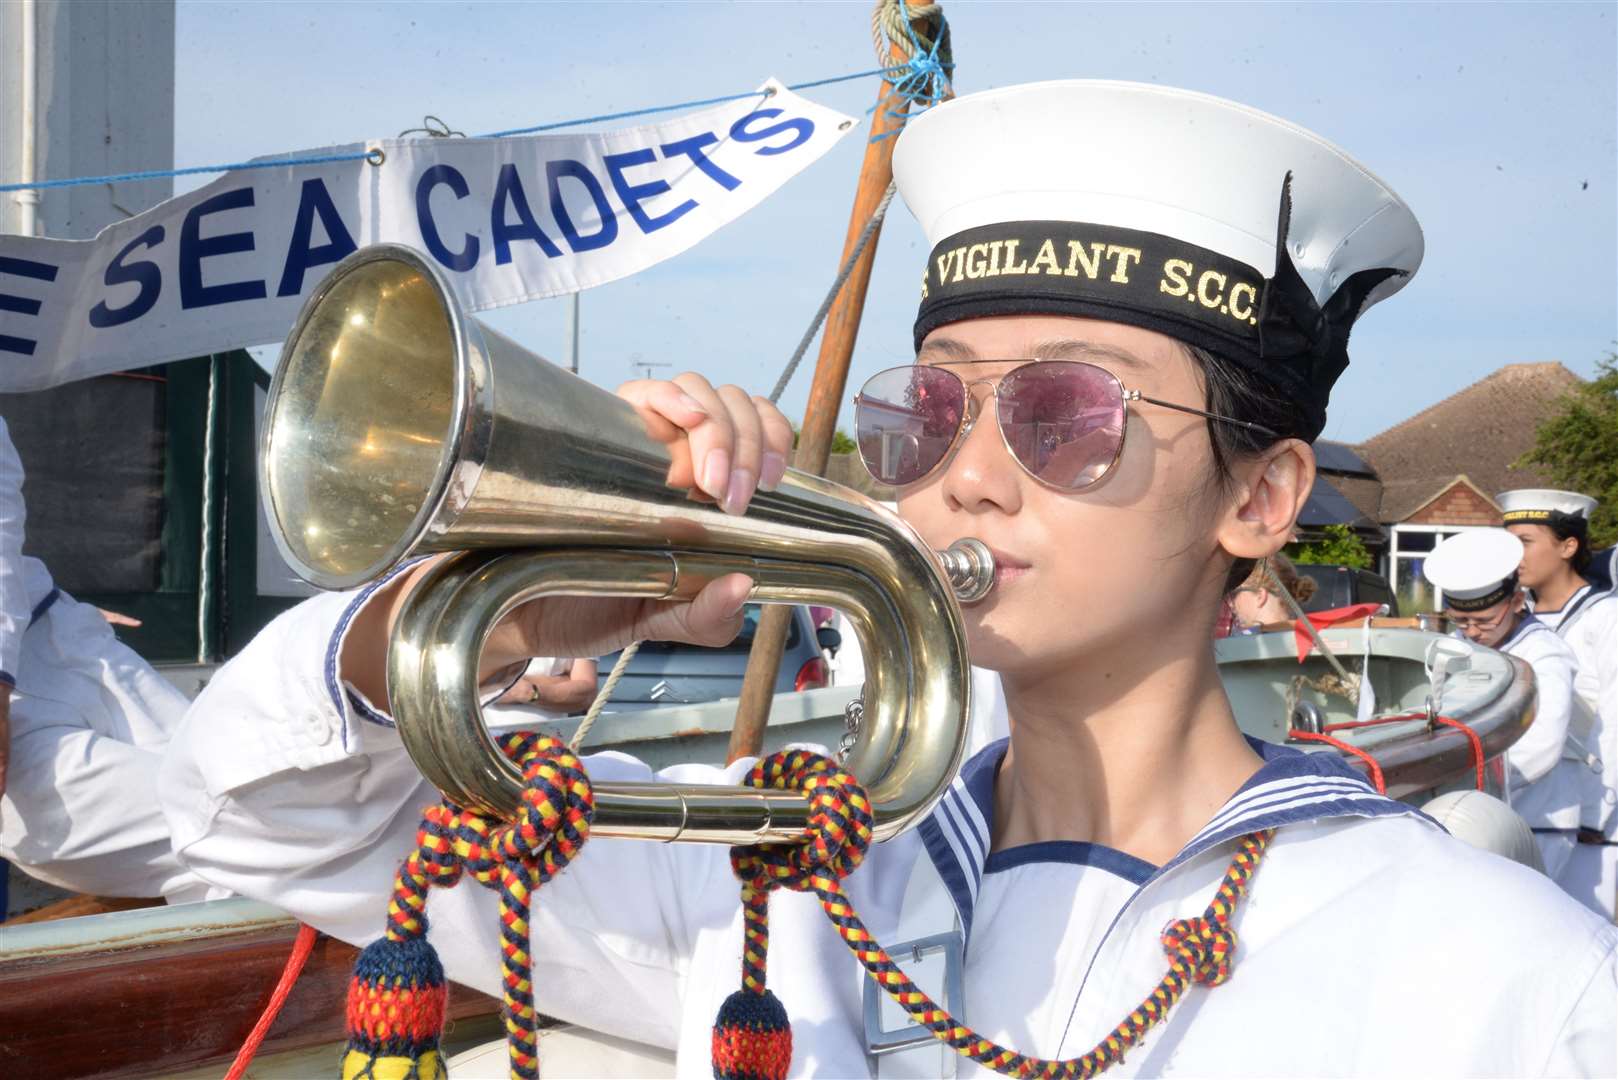 The sea cadets marching in the Carnival last year